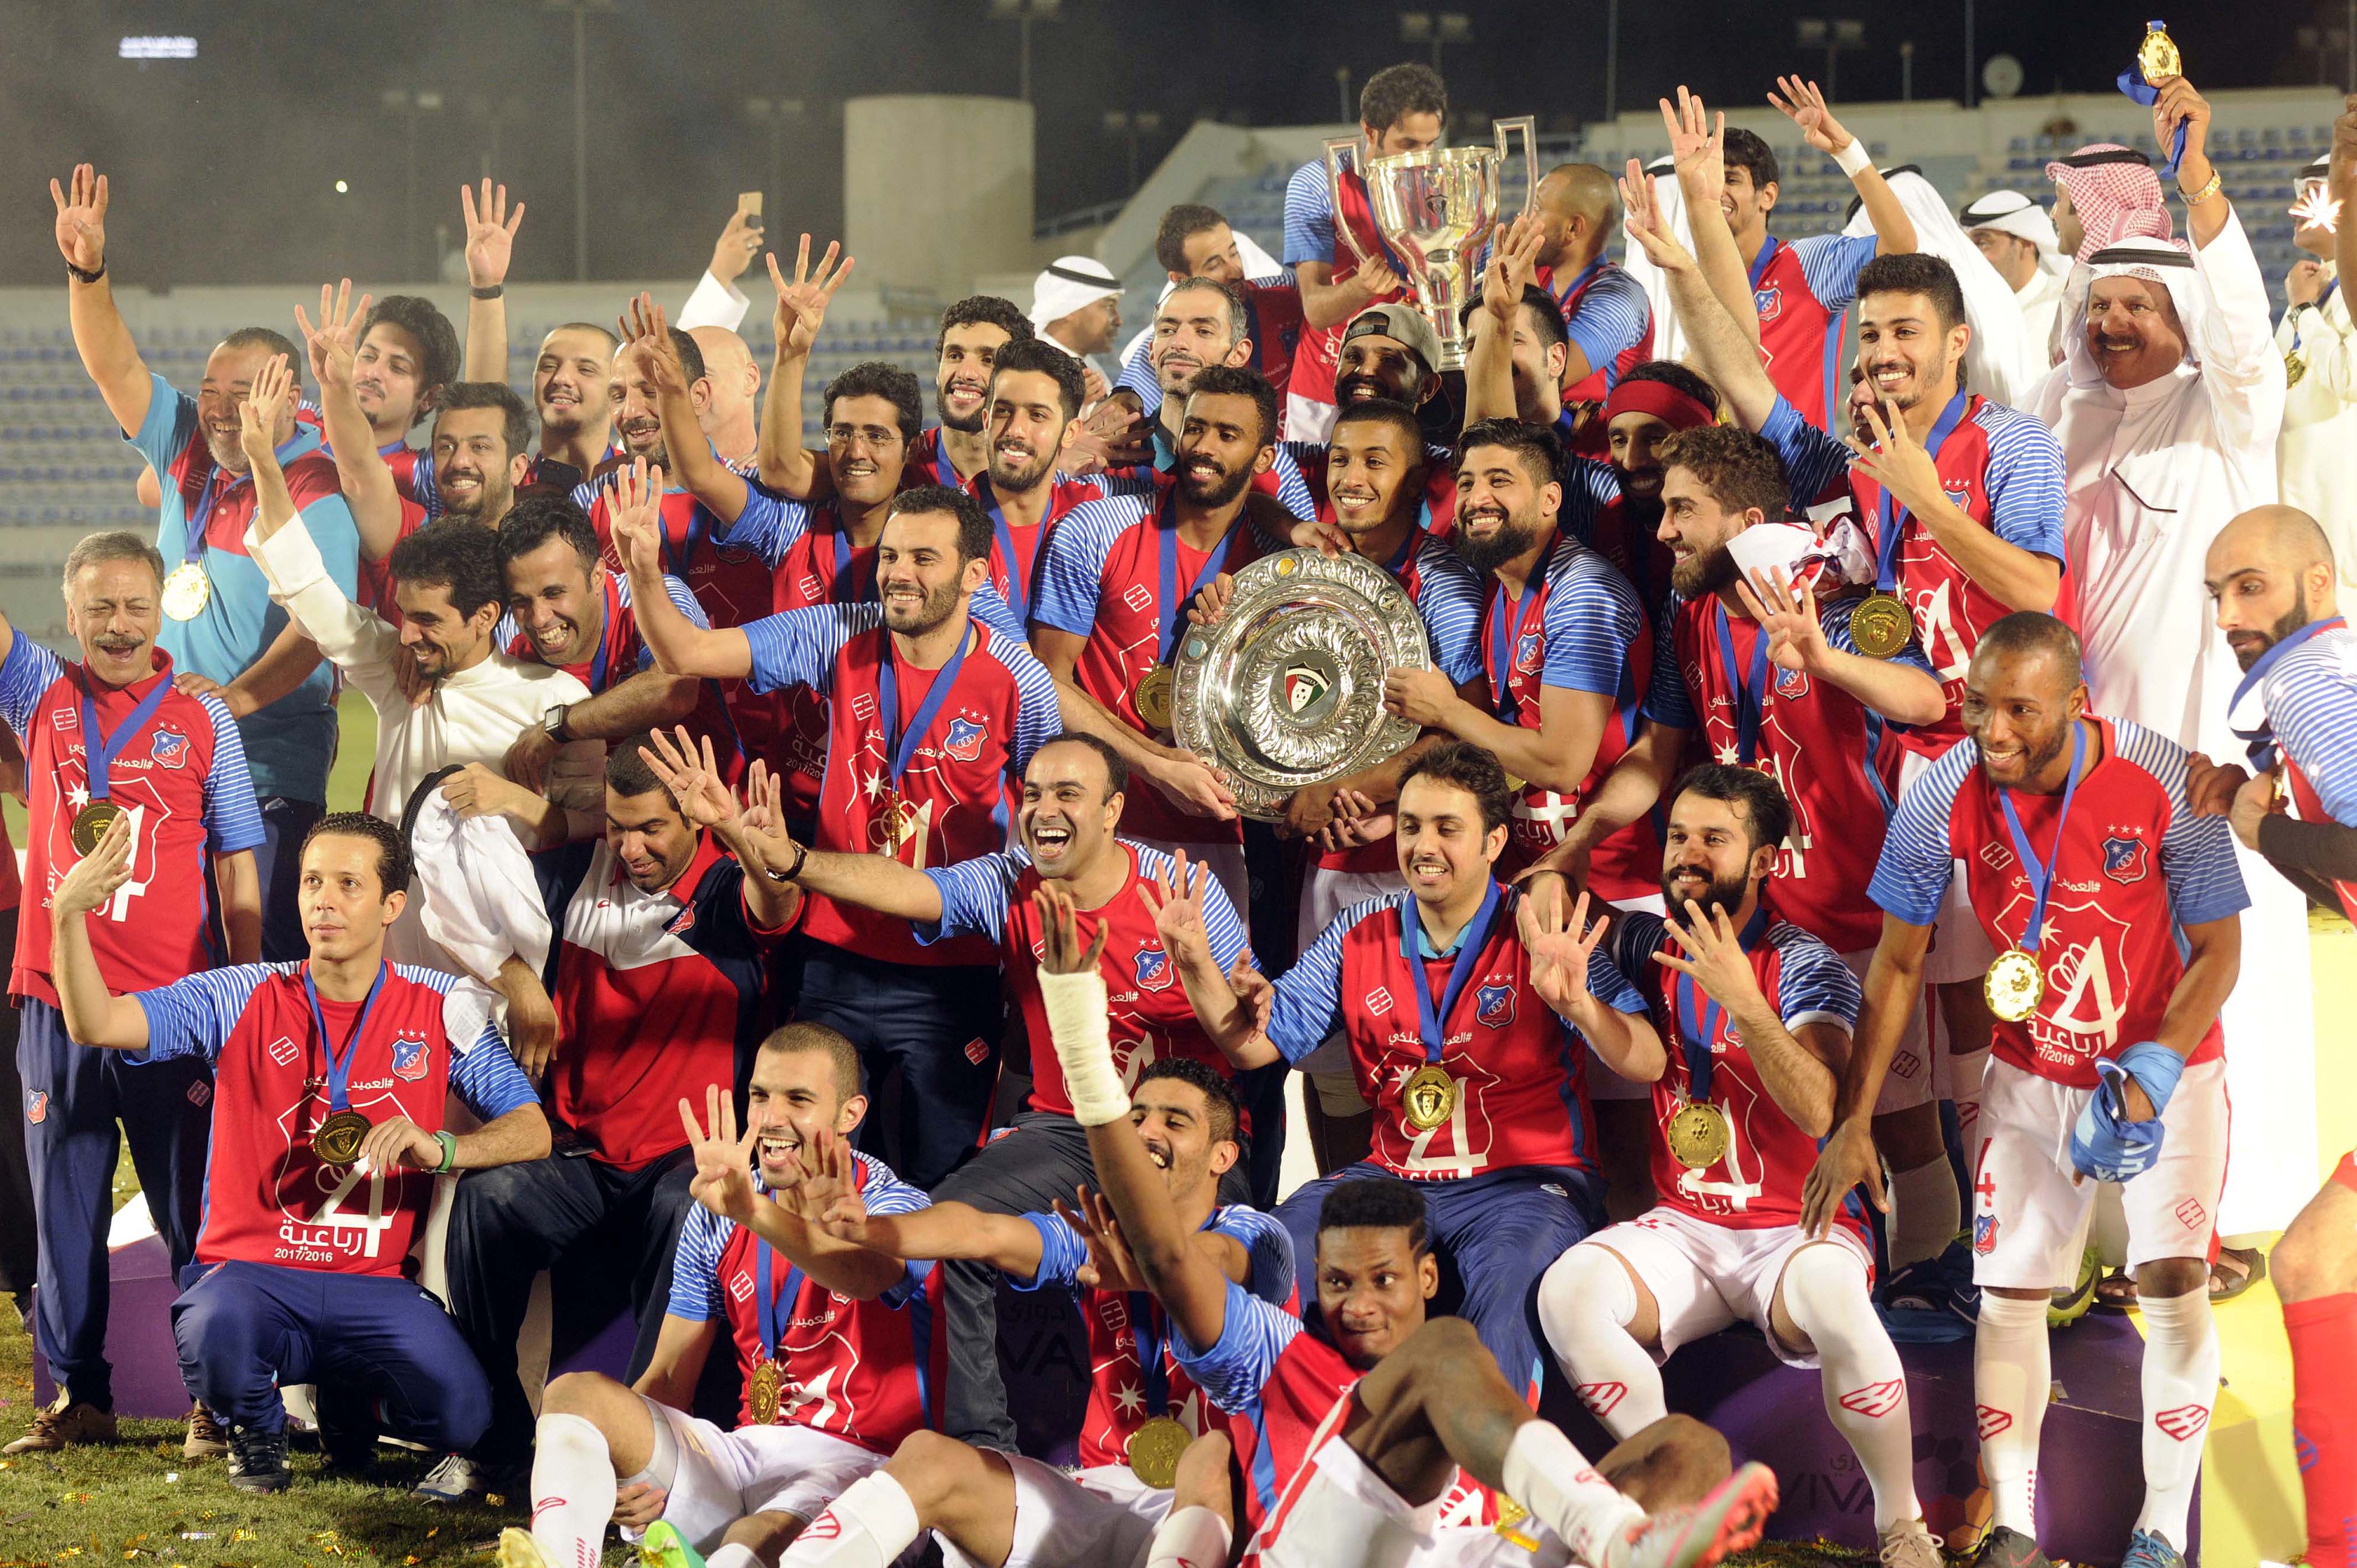 Kuwait SC crowned as champions of football premier league for 13th time